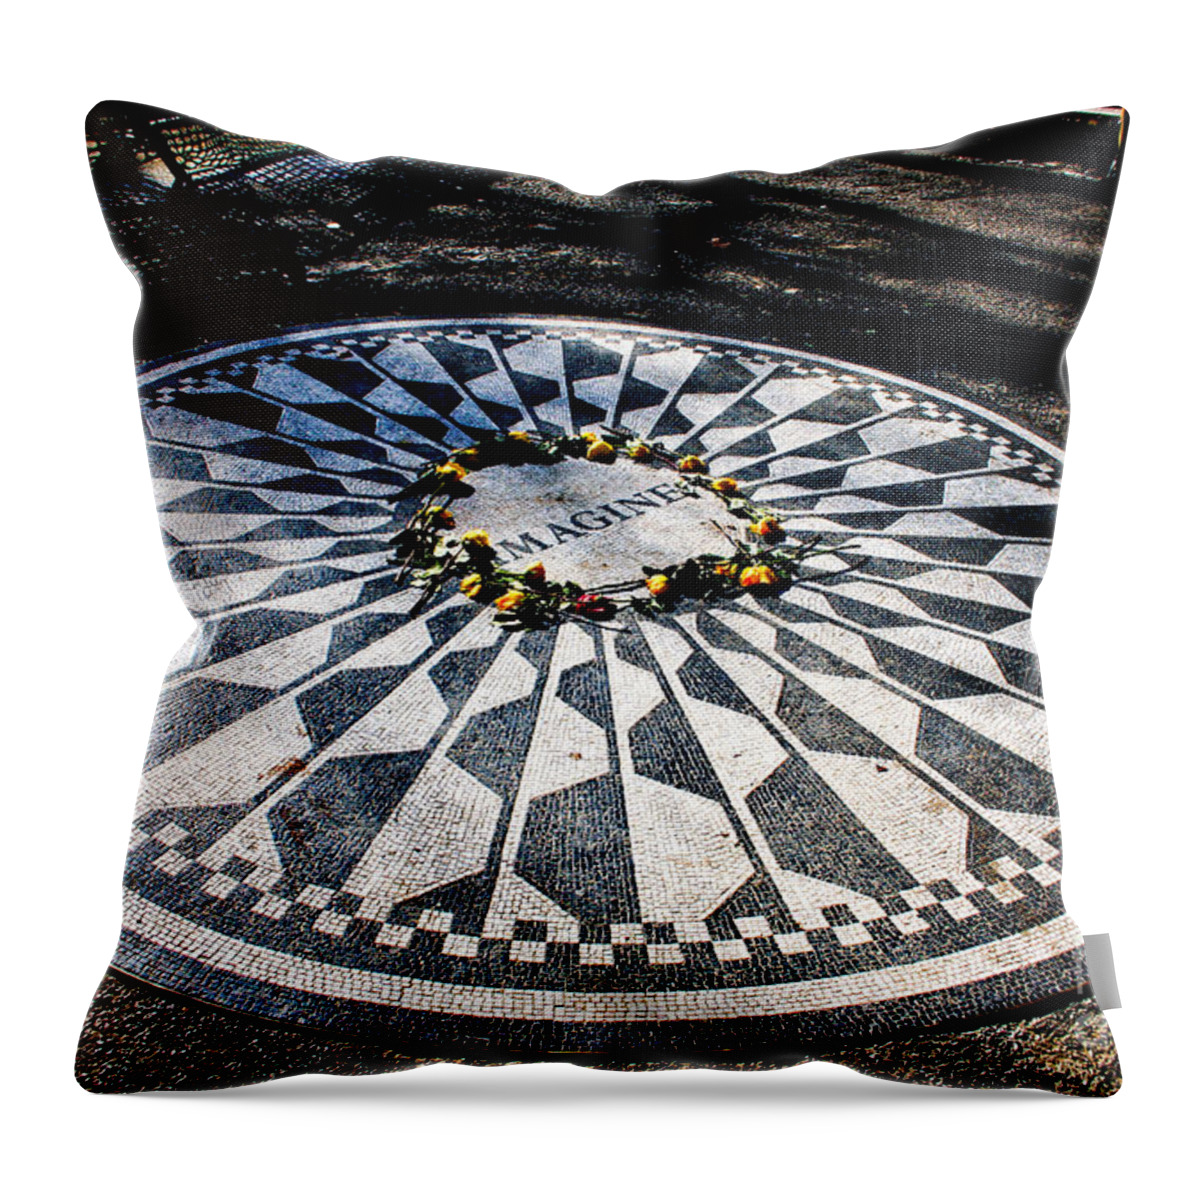 Imagine Throw Pillow featuring the photograph Imagine by Thomas Marchessault